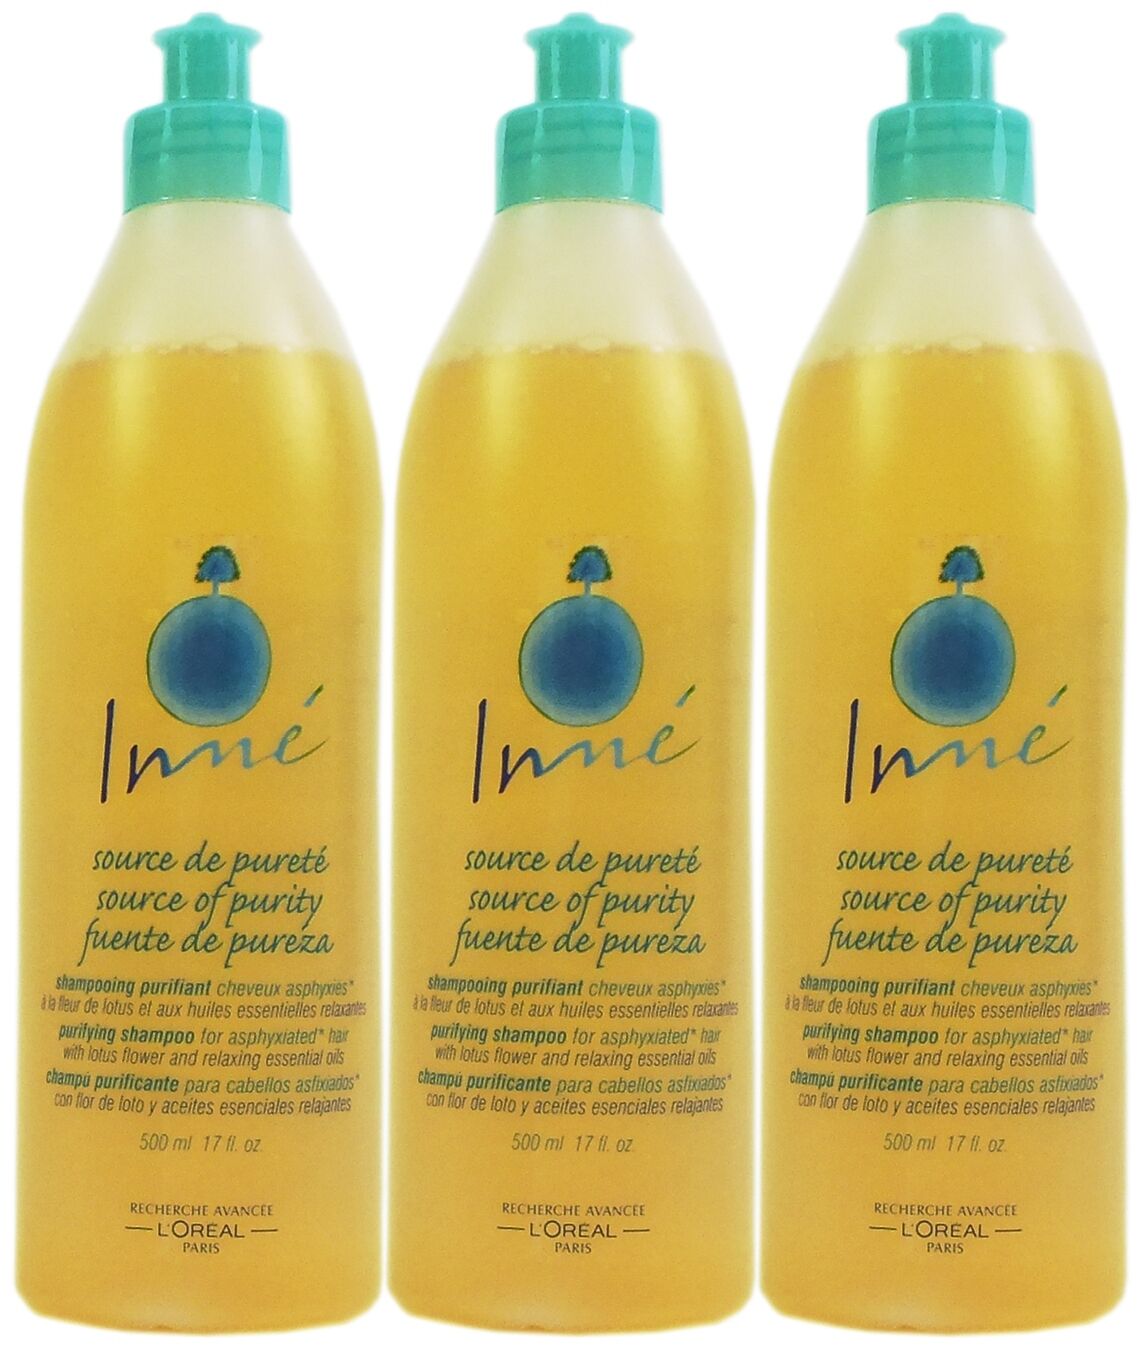 L’Oreal Inne Hair Shampoo Has lotus Flower and Relaxing Essential Oil 500ml